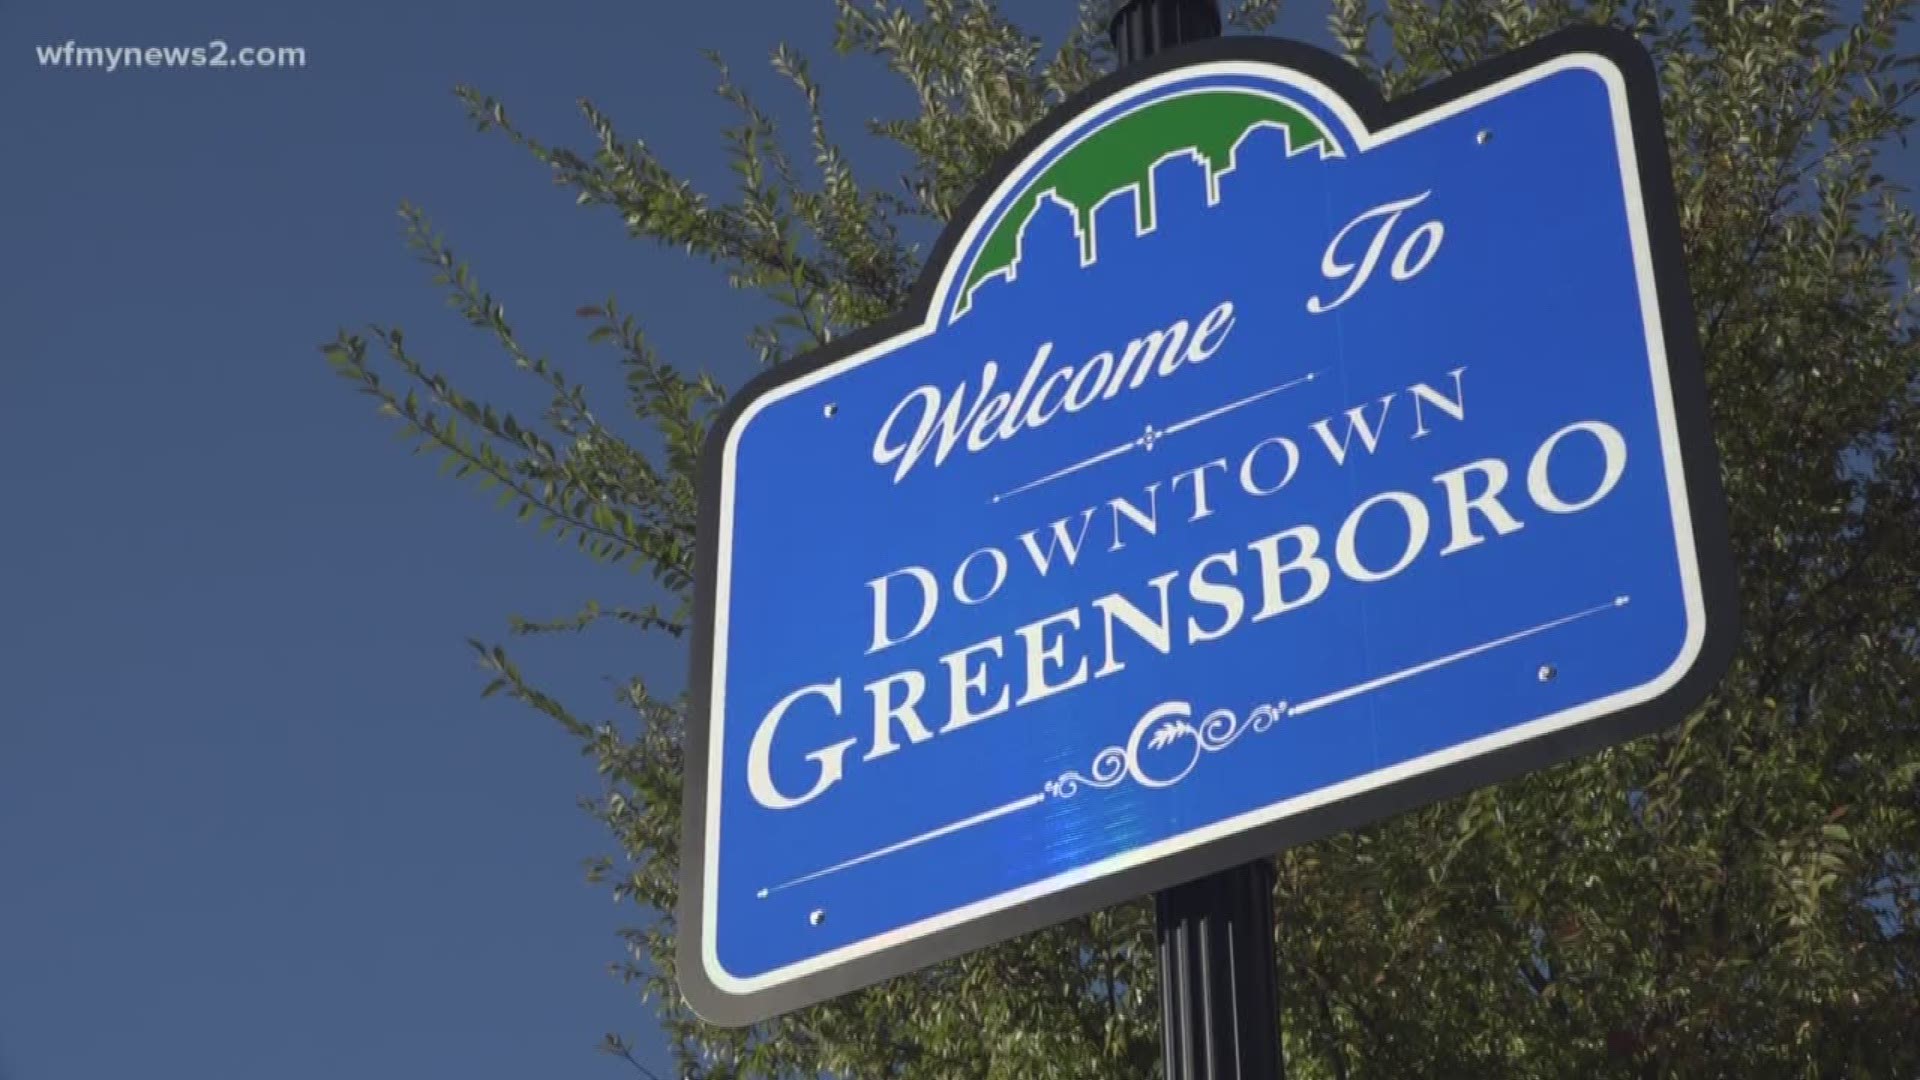 The Triad Business Journal stops by to talk about a new downtown Greensboro restaurant and the push to create more jobs in several Triad cities.